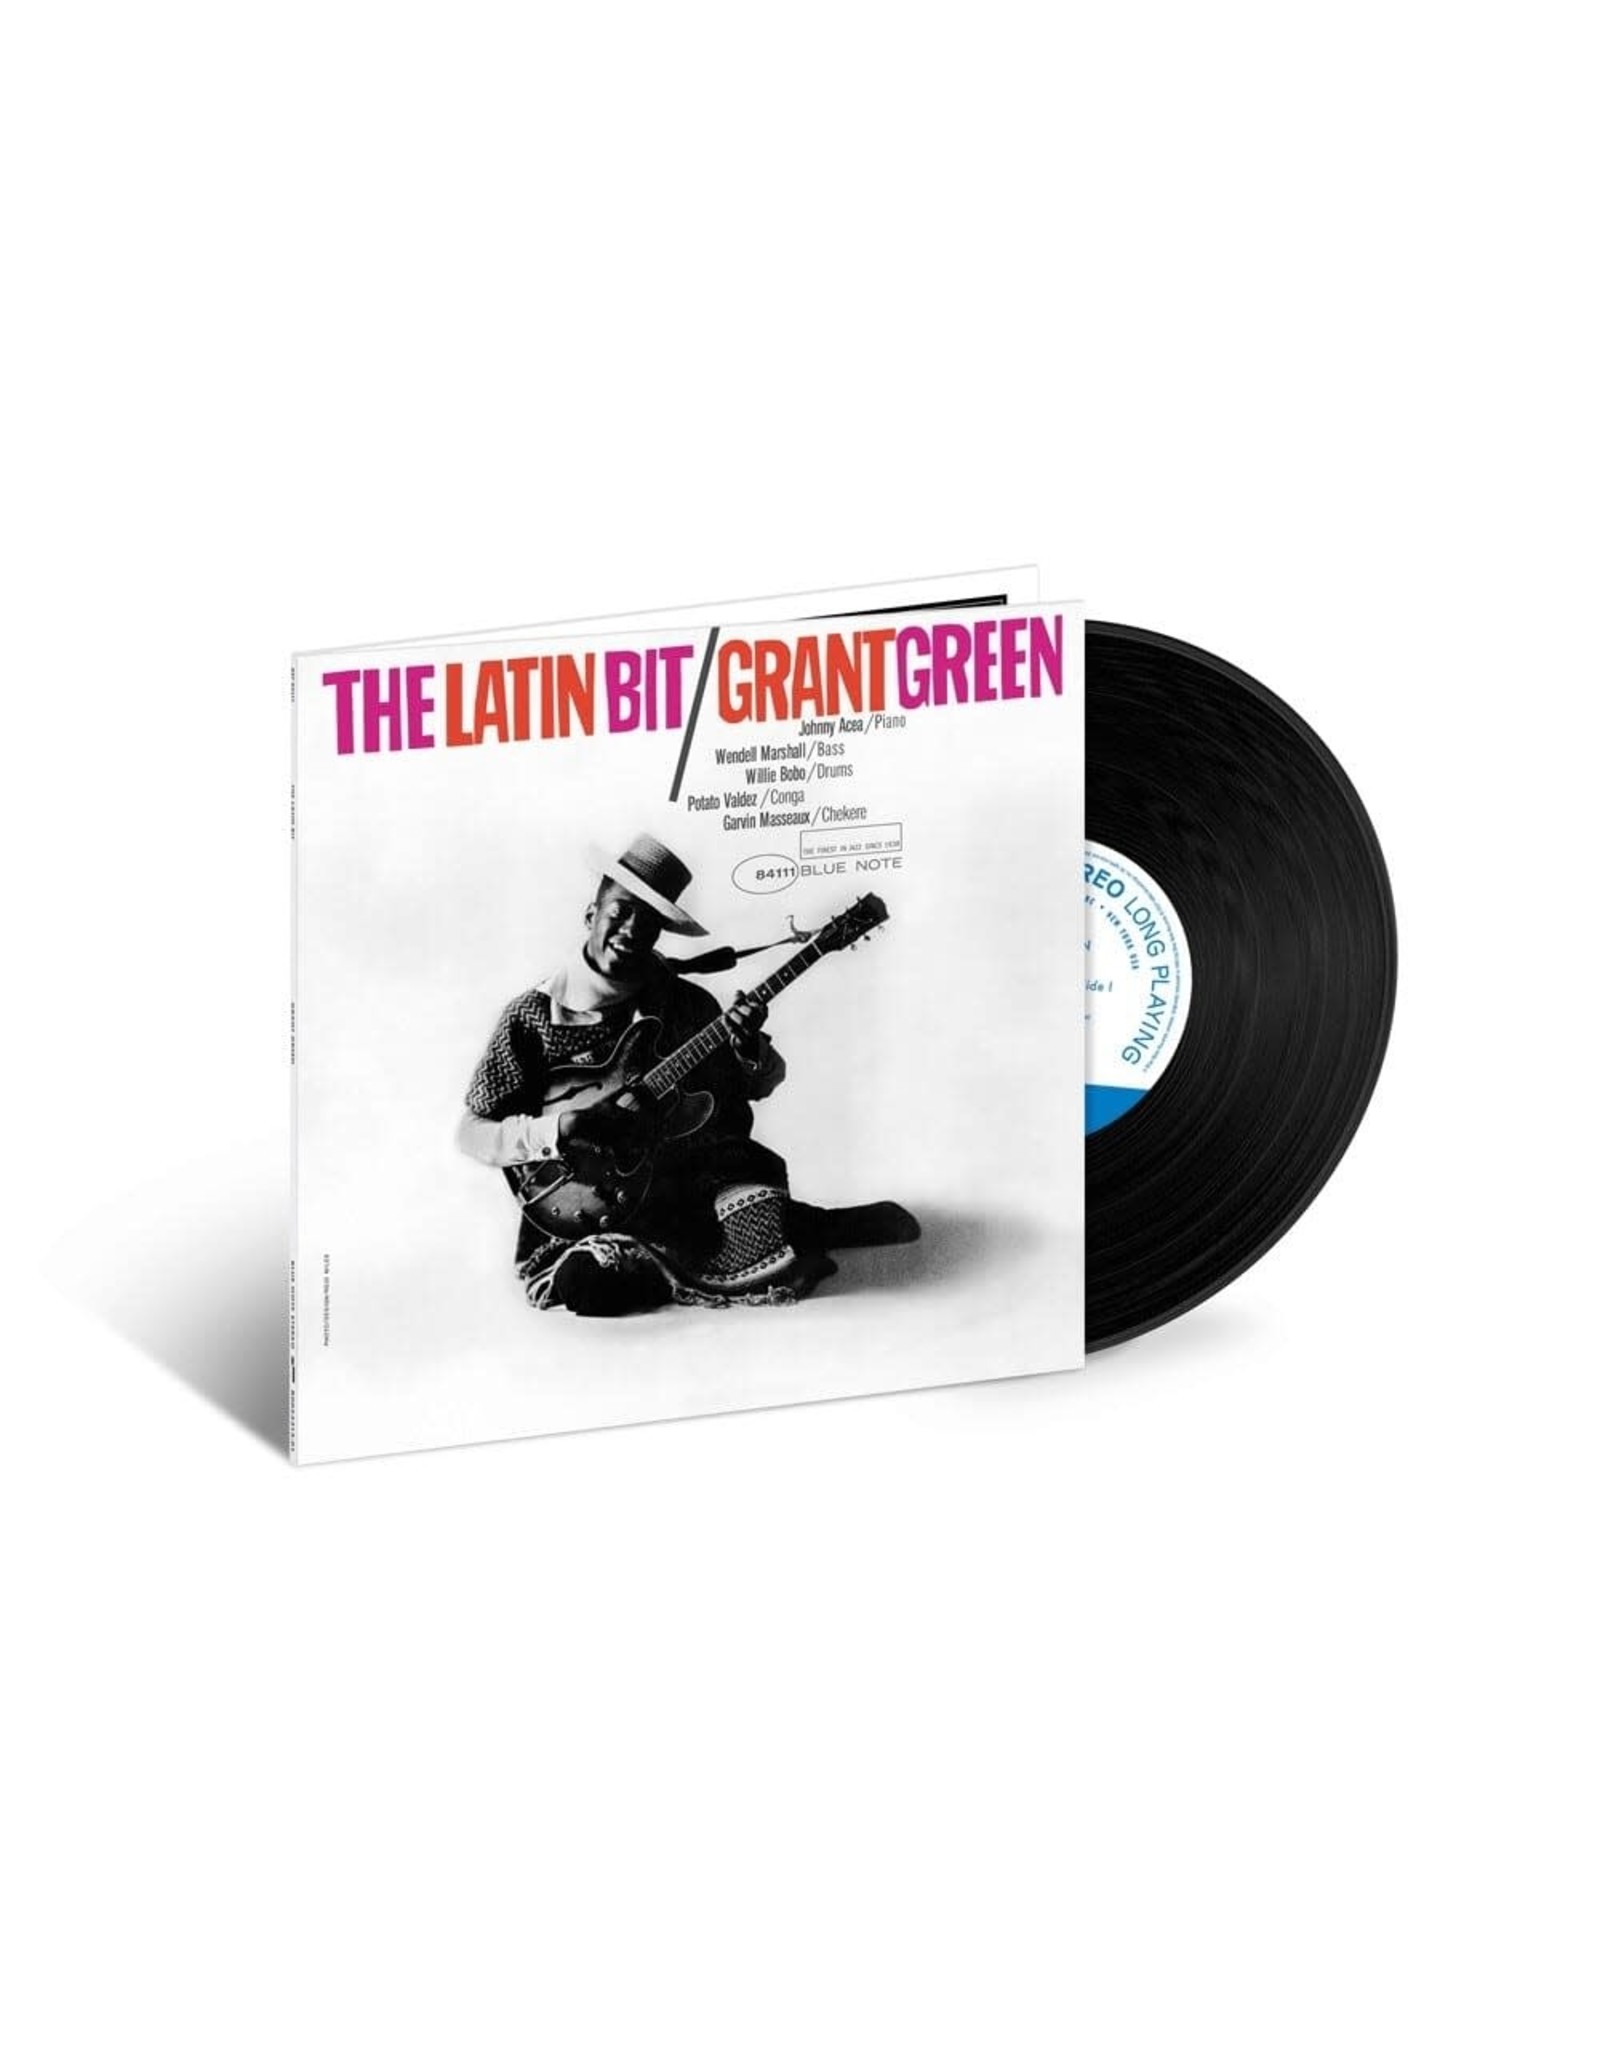 Blue Note Green, Grant: The Latin Bit (Blue Note Tone Poet Series) LP